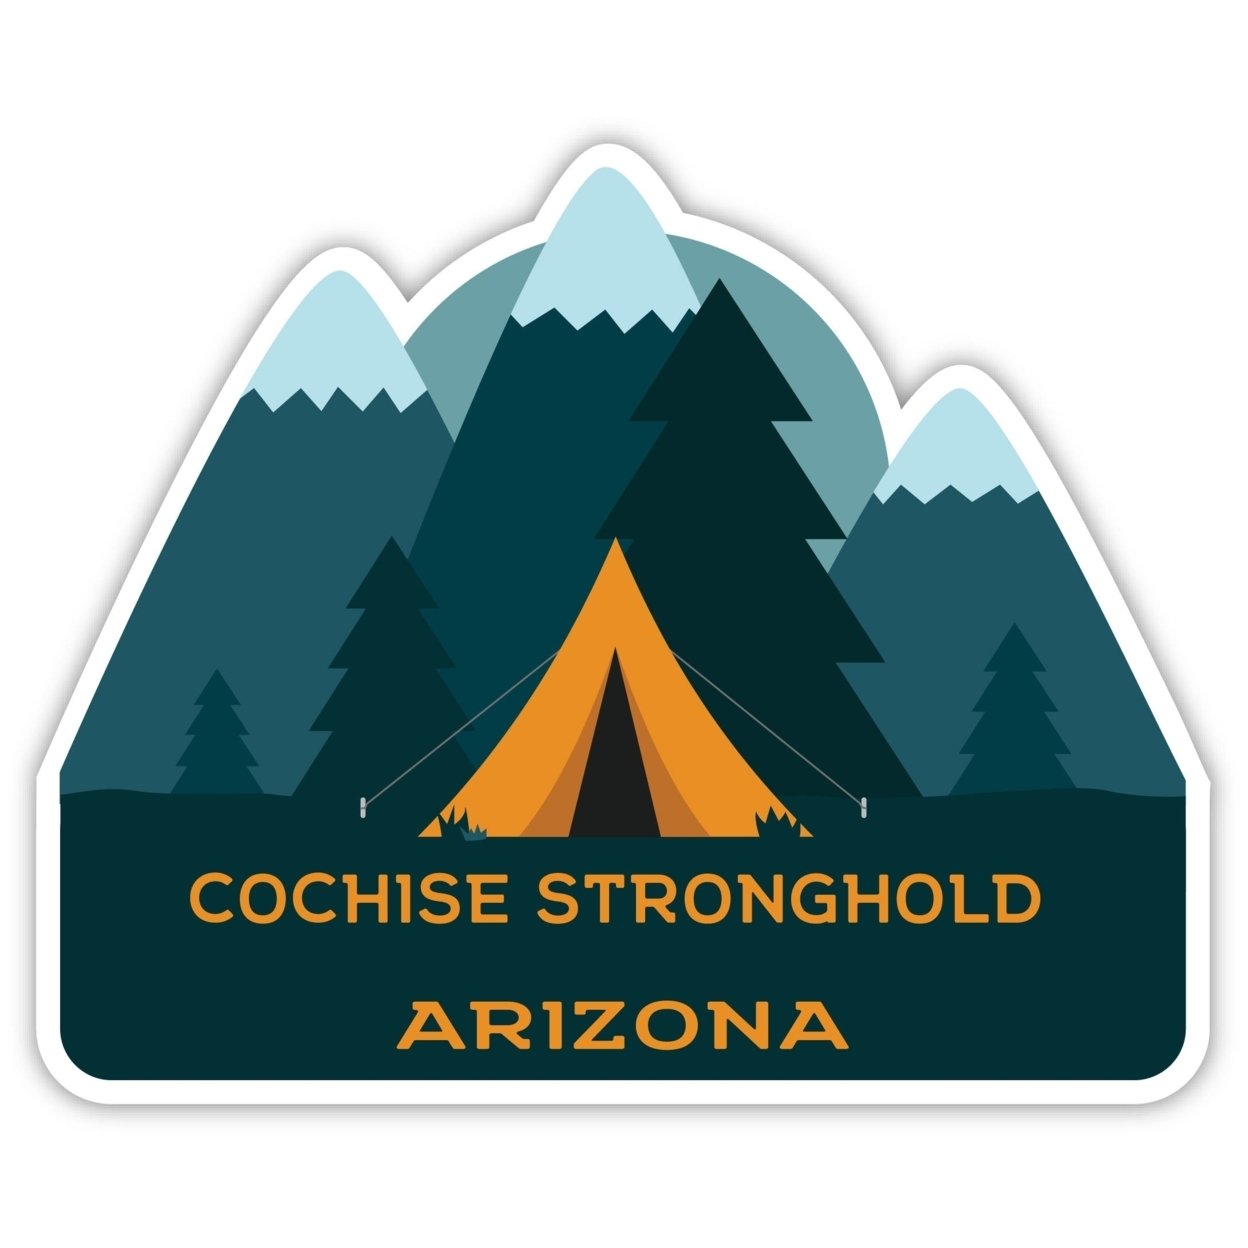 Cochise Stronghold Arizona Souvenir Decorative Stickers (Choose Theme And Size) - 4-Pack, 4-Inch, Tent